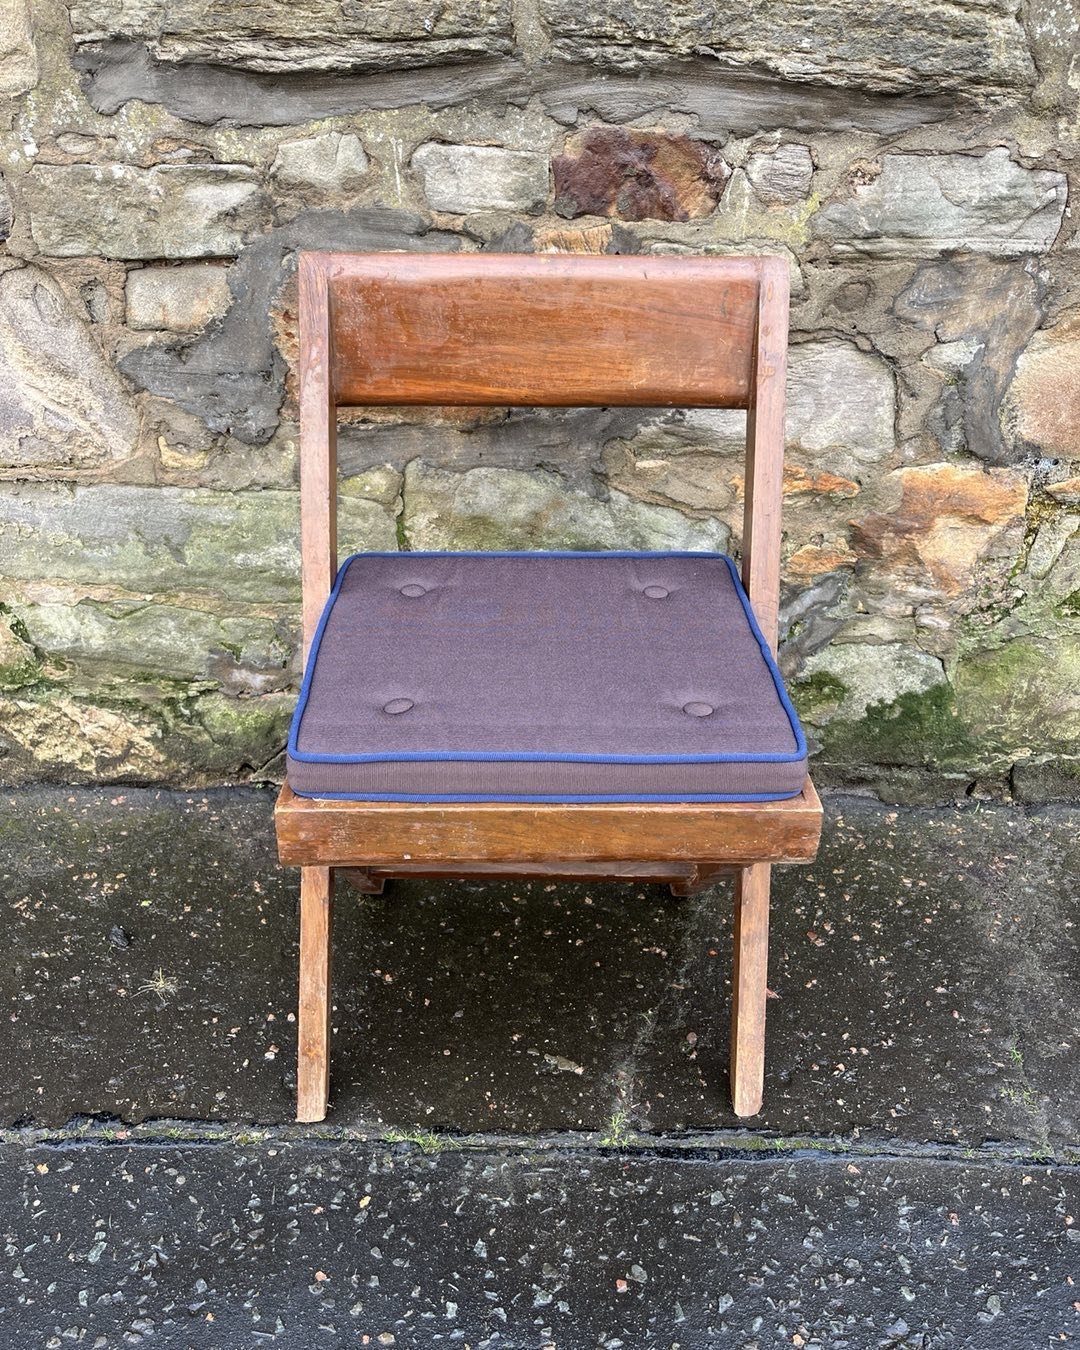 Pierre Jeanneret Library Chair.Circa 1950s.Excellent Original Condition.Teak and Braided Cane.Worldwide Shipping Available.Several Available.Dm for info#library#architect#sculpture#artisan#original#patina#frenchdesign#collect#interiorstyle#decorative